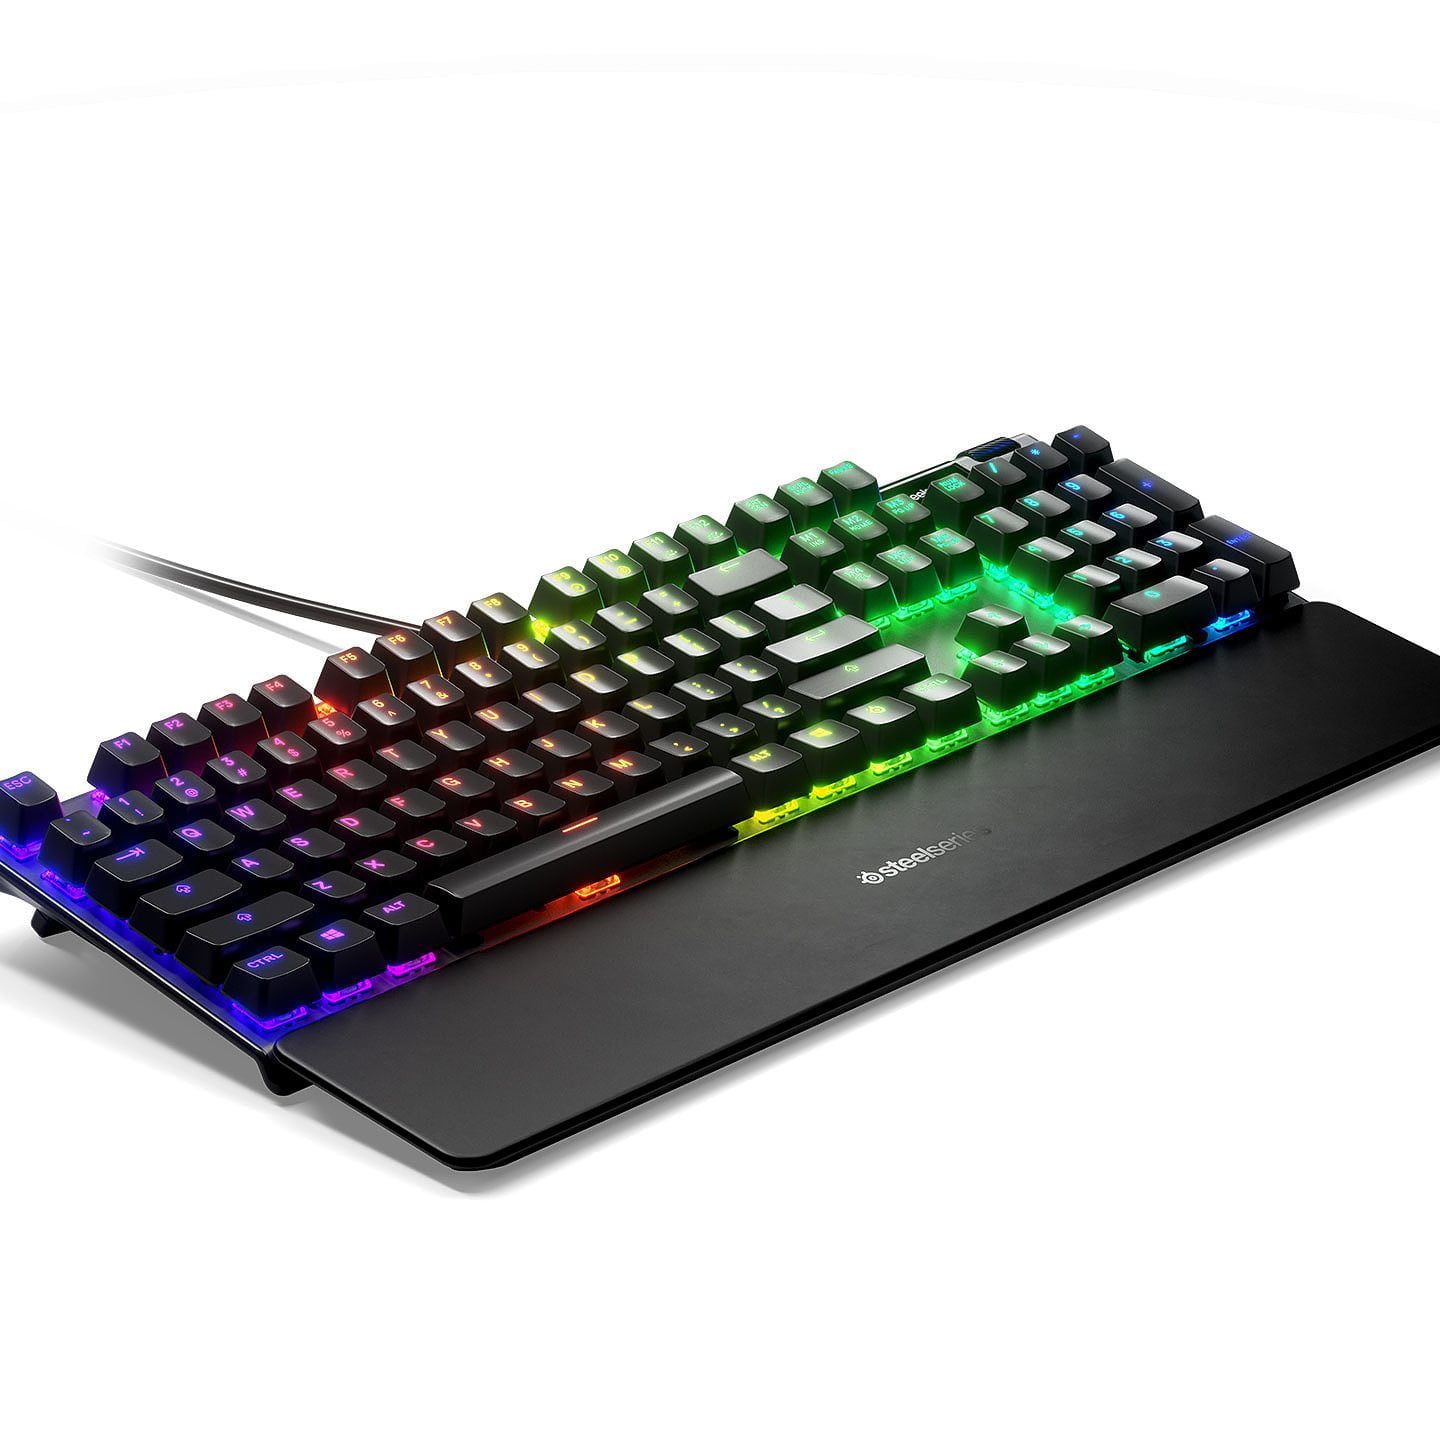 Clavier gamer: High-end gaming keyboard that’s big in the French market.